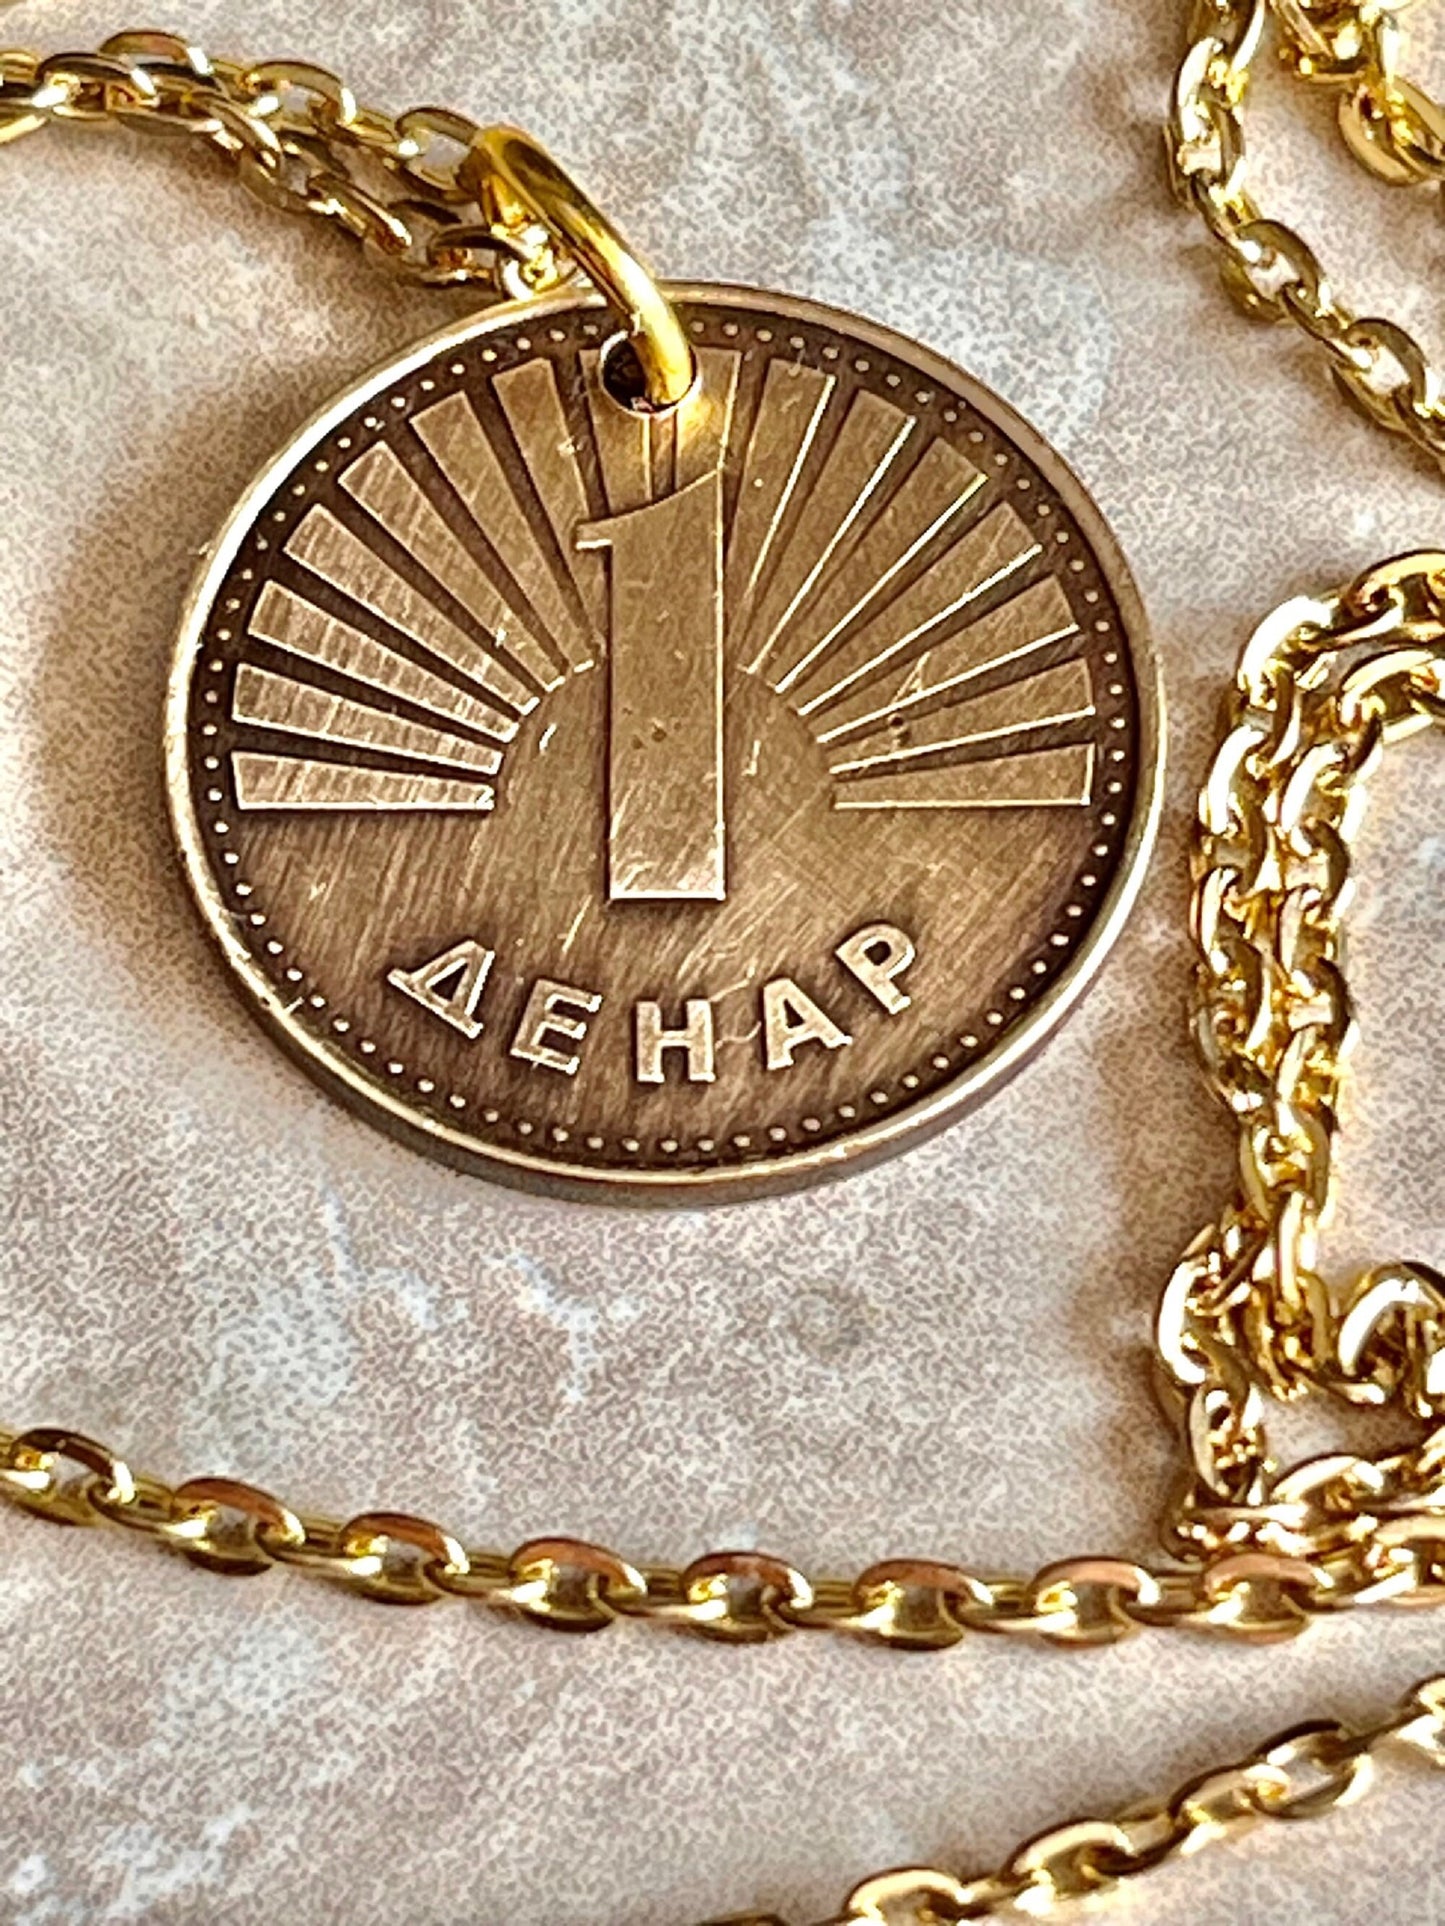 Macedonian Republic 1 Denier Coin Necklace Pendant Custom Charm Gift For Friend Coin Charm Gift For Him, Her, Coin Collector, World Coins